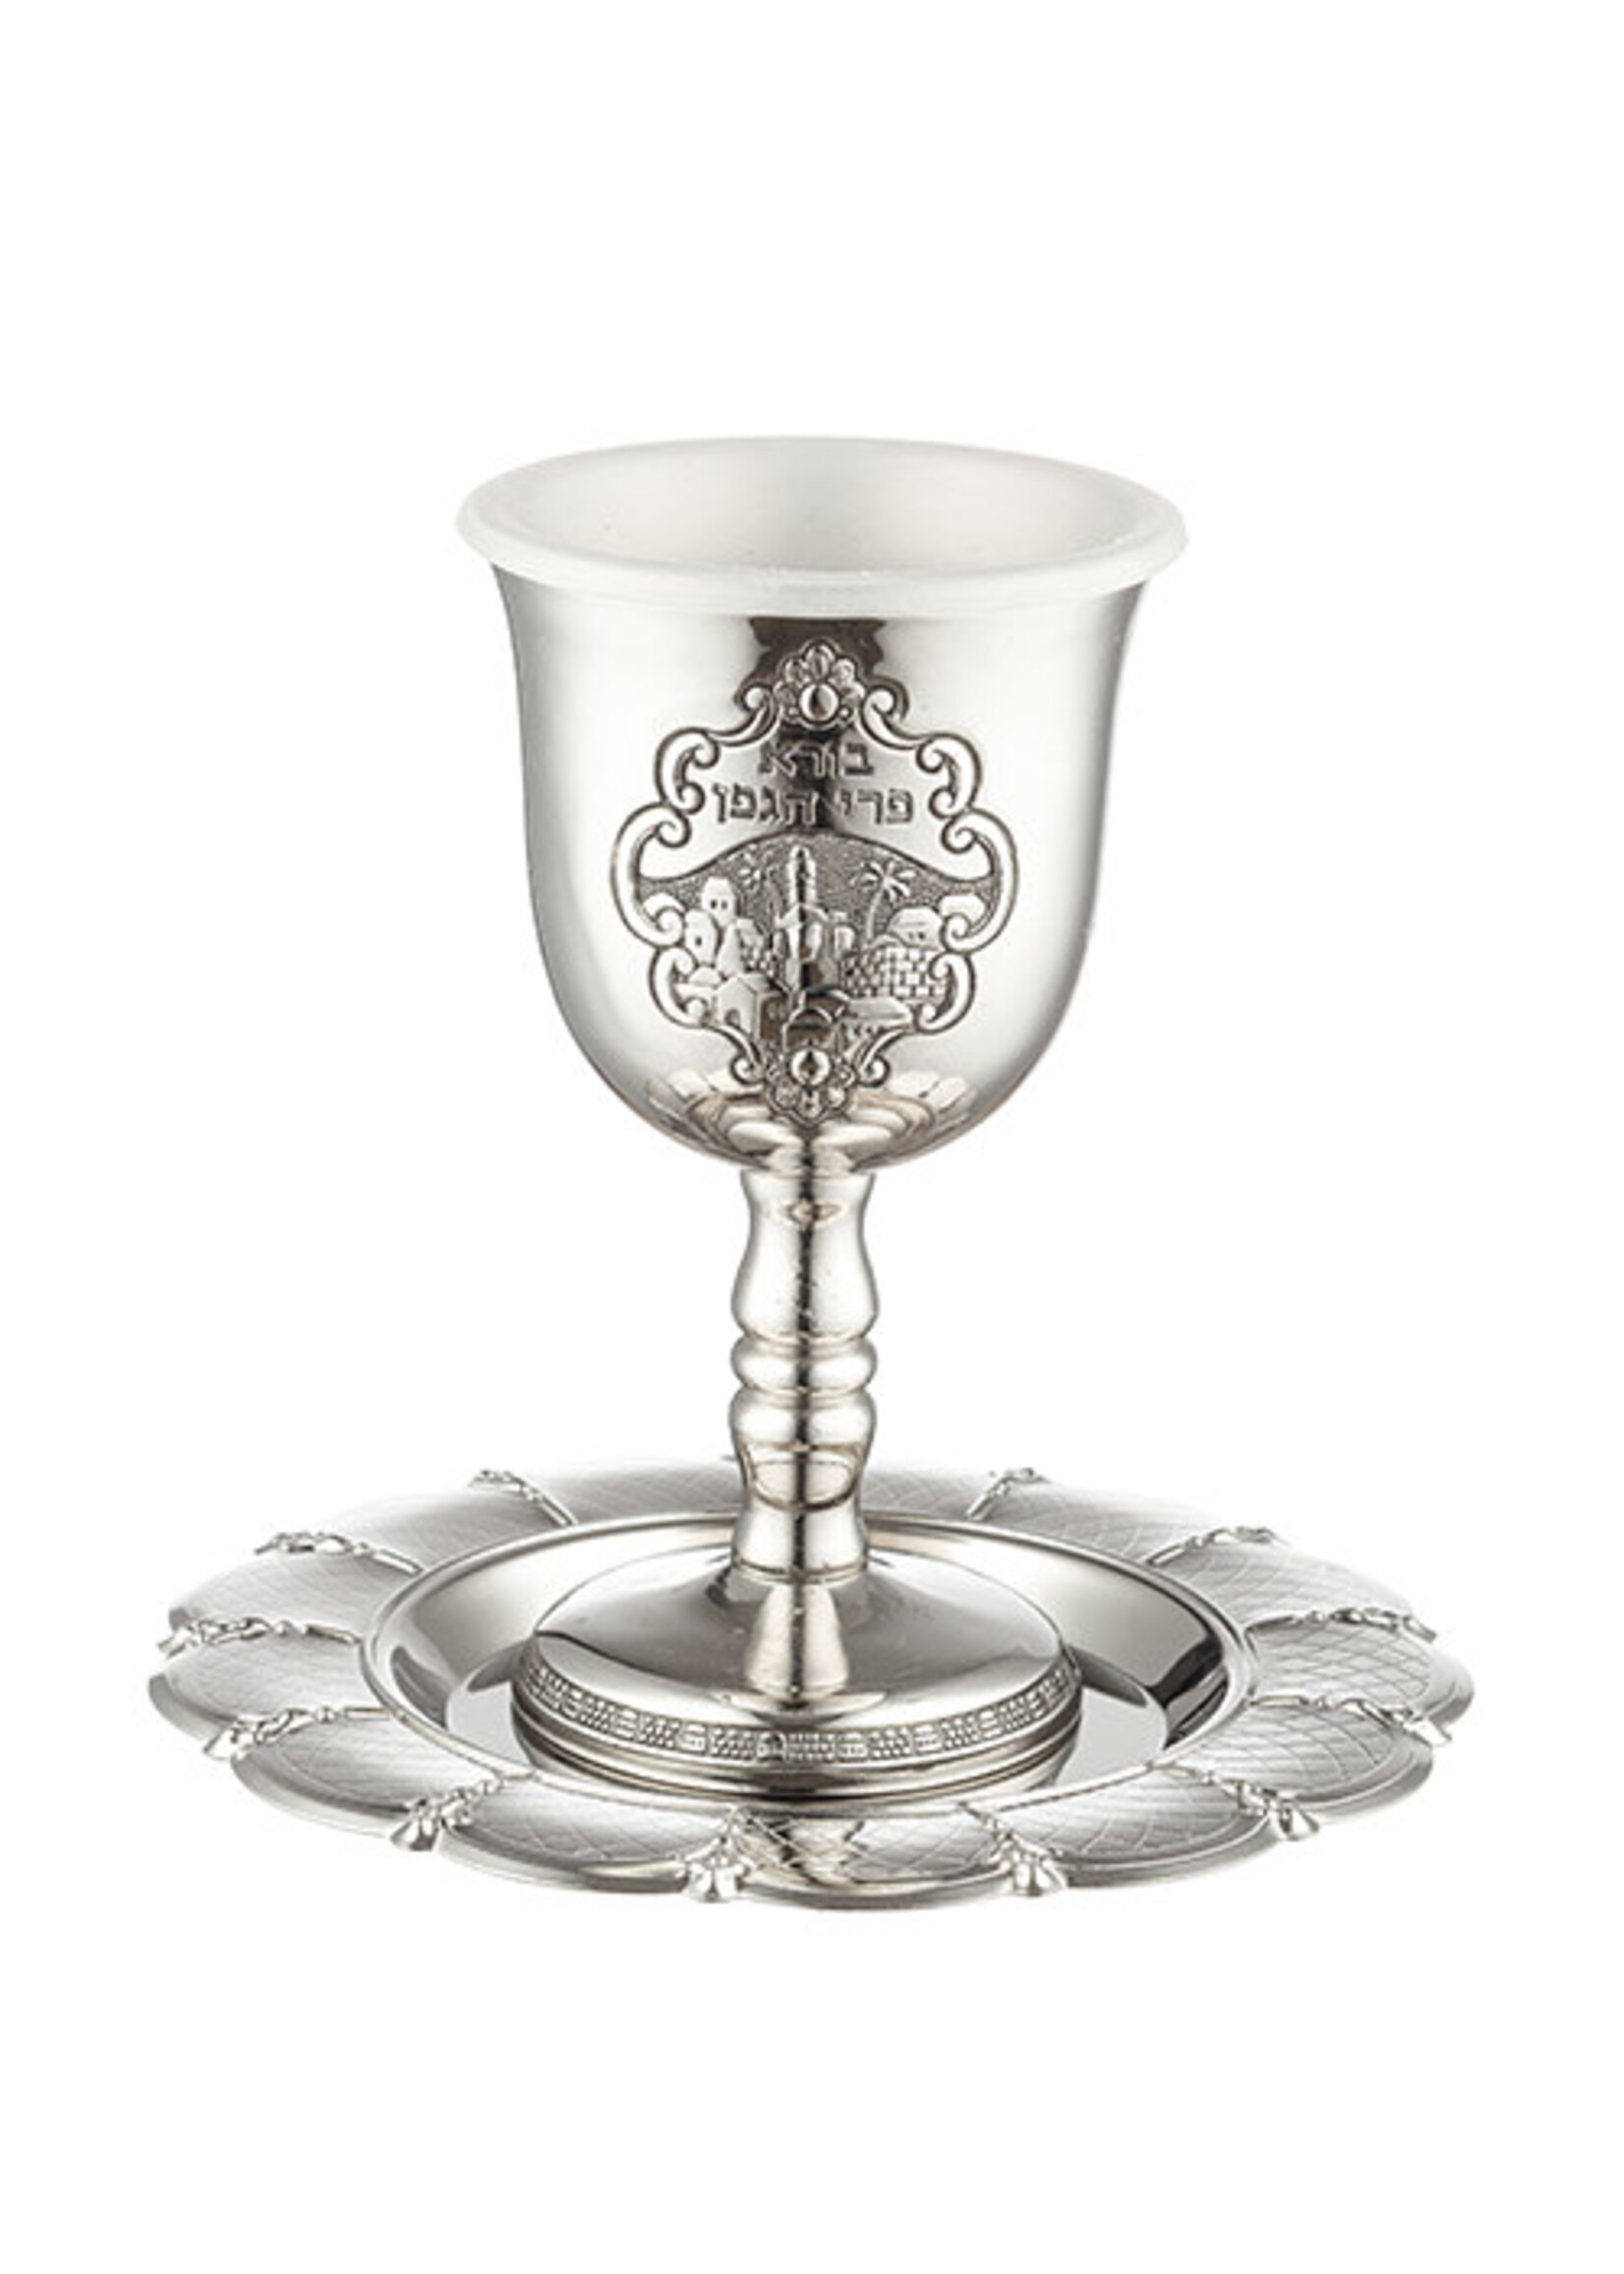 KIDDUSH CUP SILVER PLATED FINISH- NICKEL